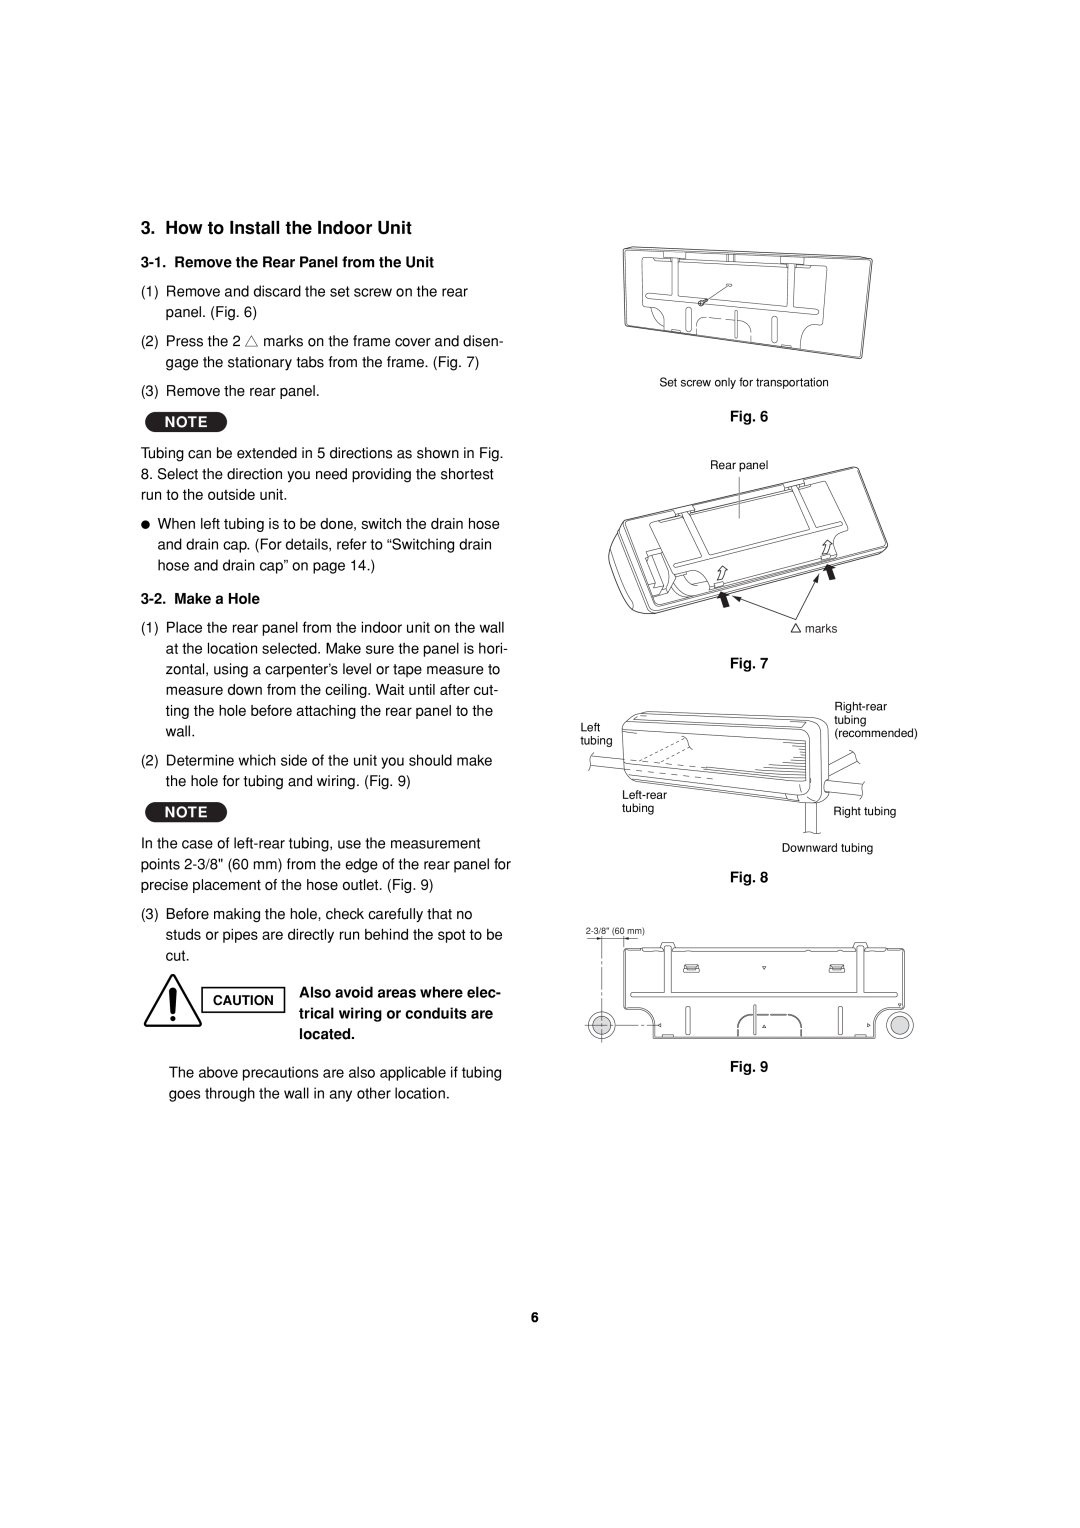 Sanyo CH2472, CH1872 How to Install the Indoor Unit, Remove the Rear Panel from the Unit, Make a Hole, located, Fig 